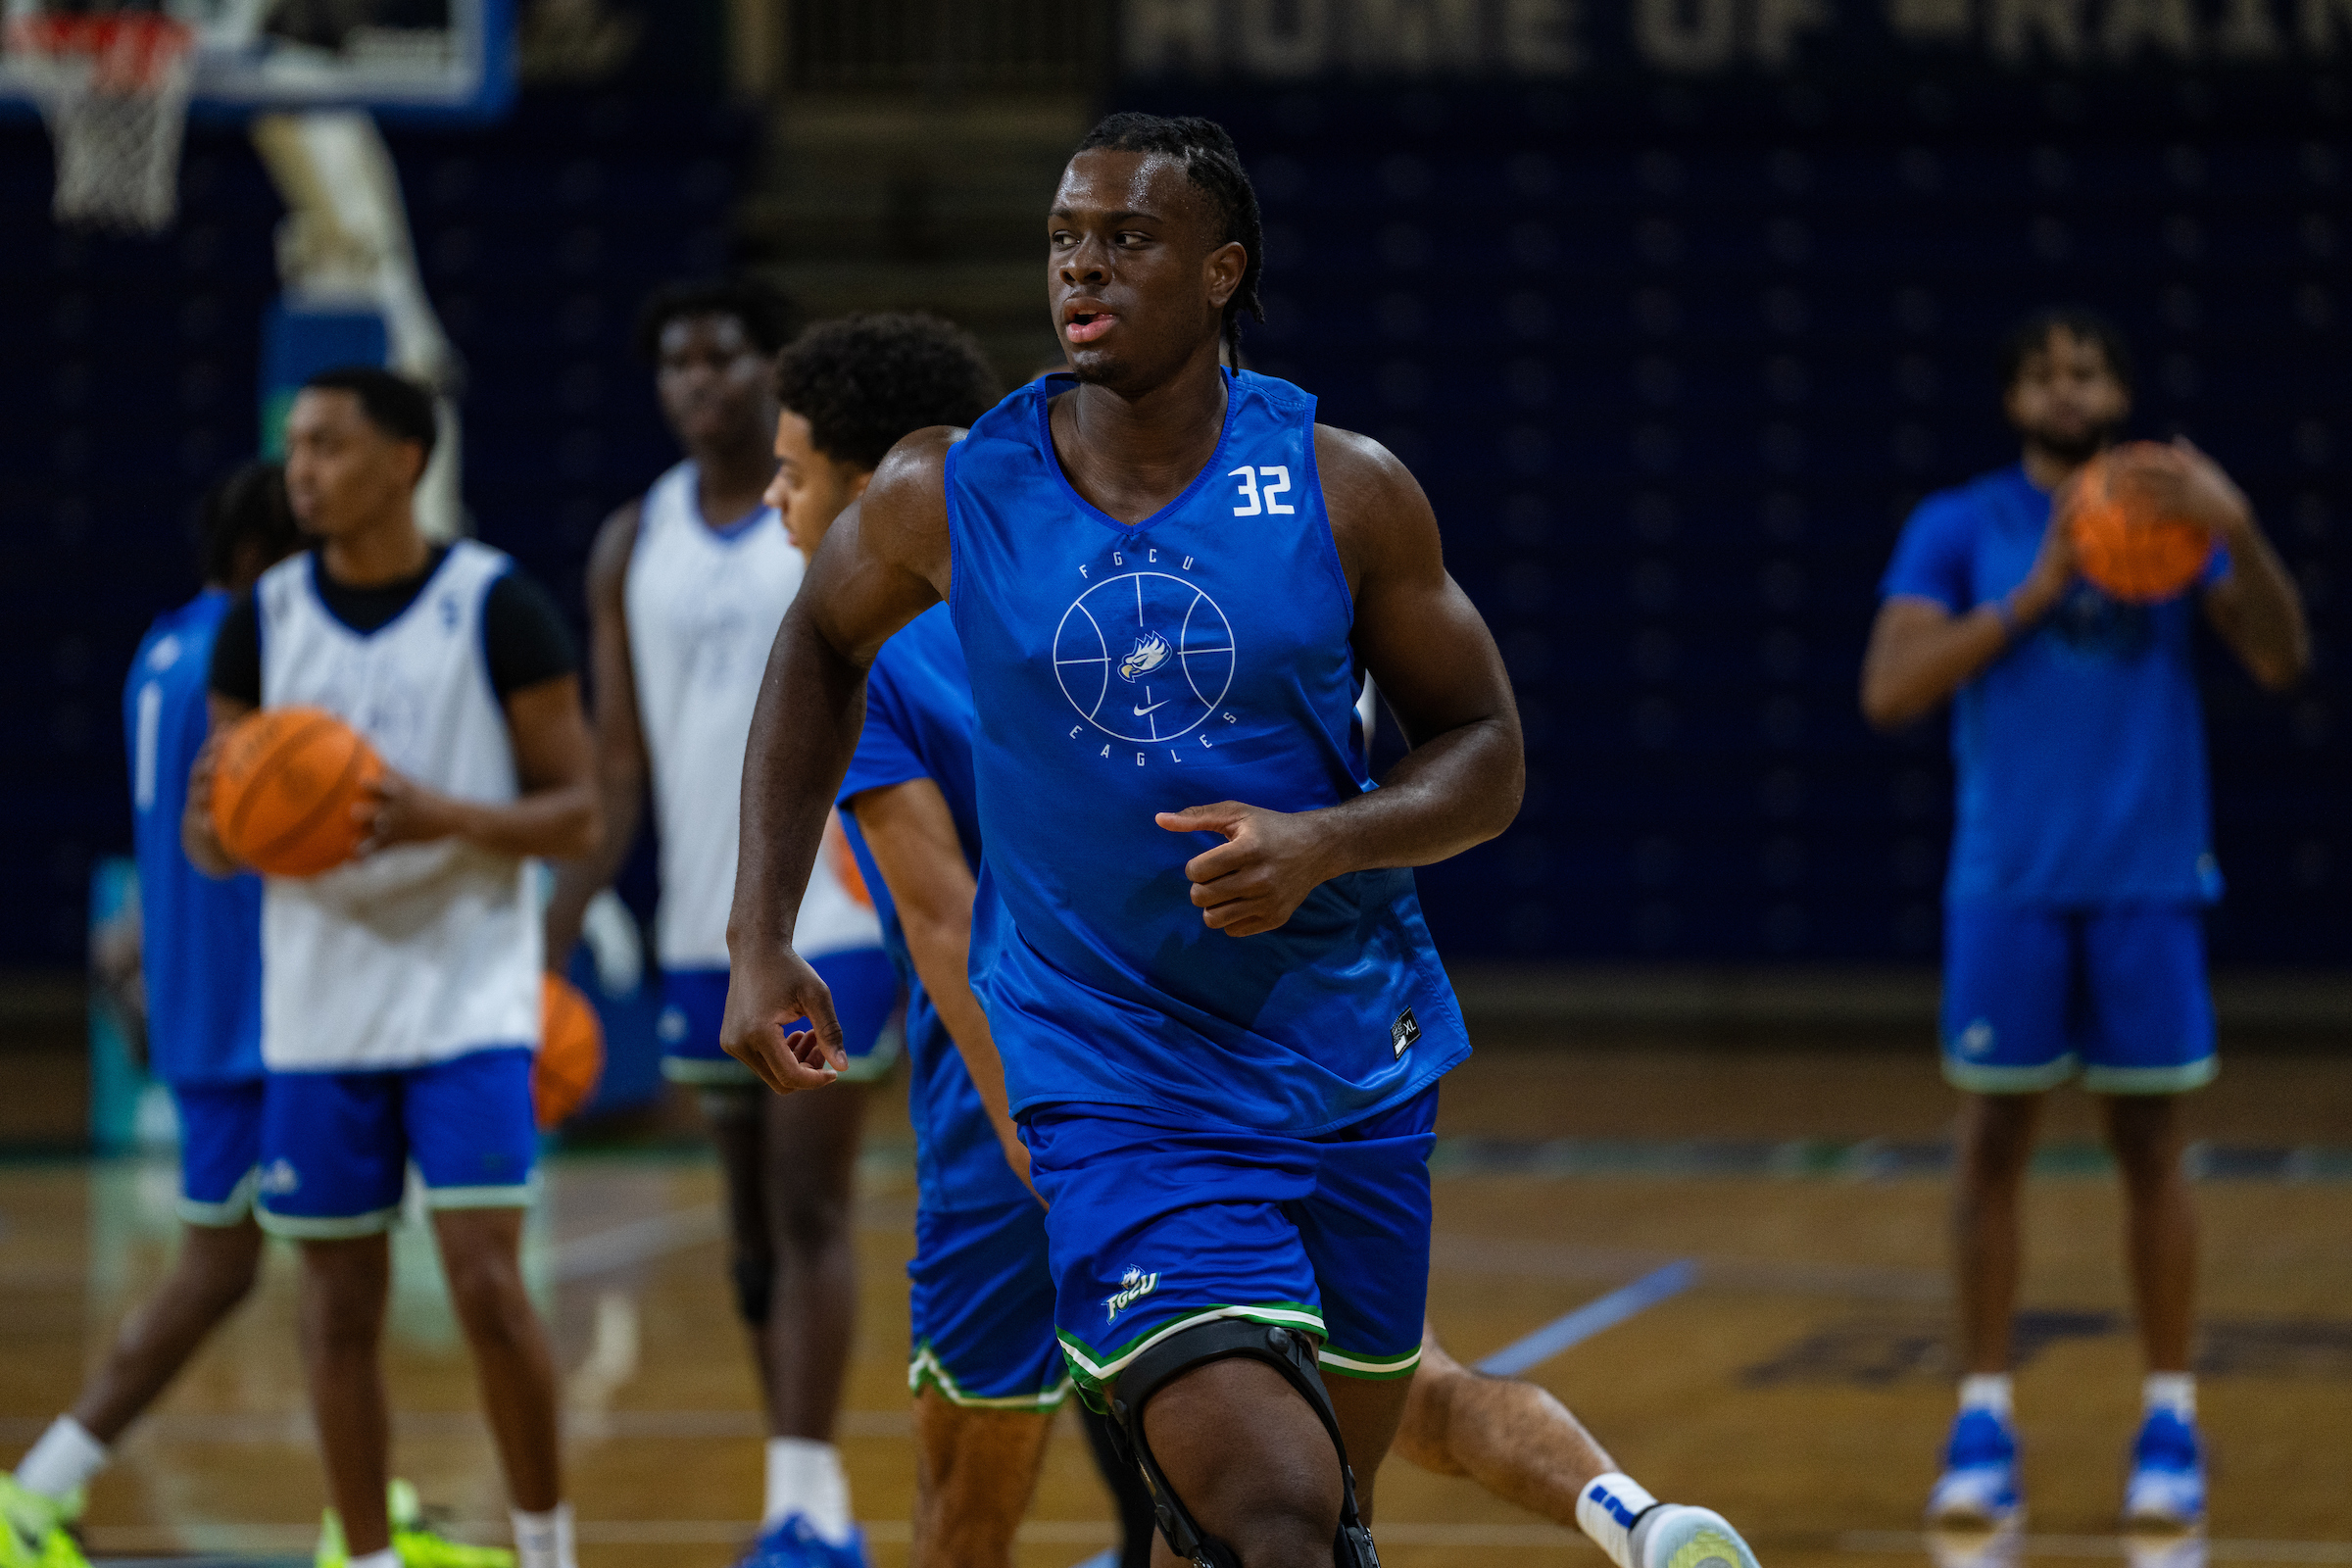 Men's Hoops Clashes with Miami on Saturday - FGCU Athletics